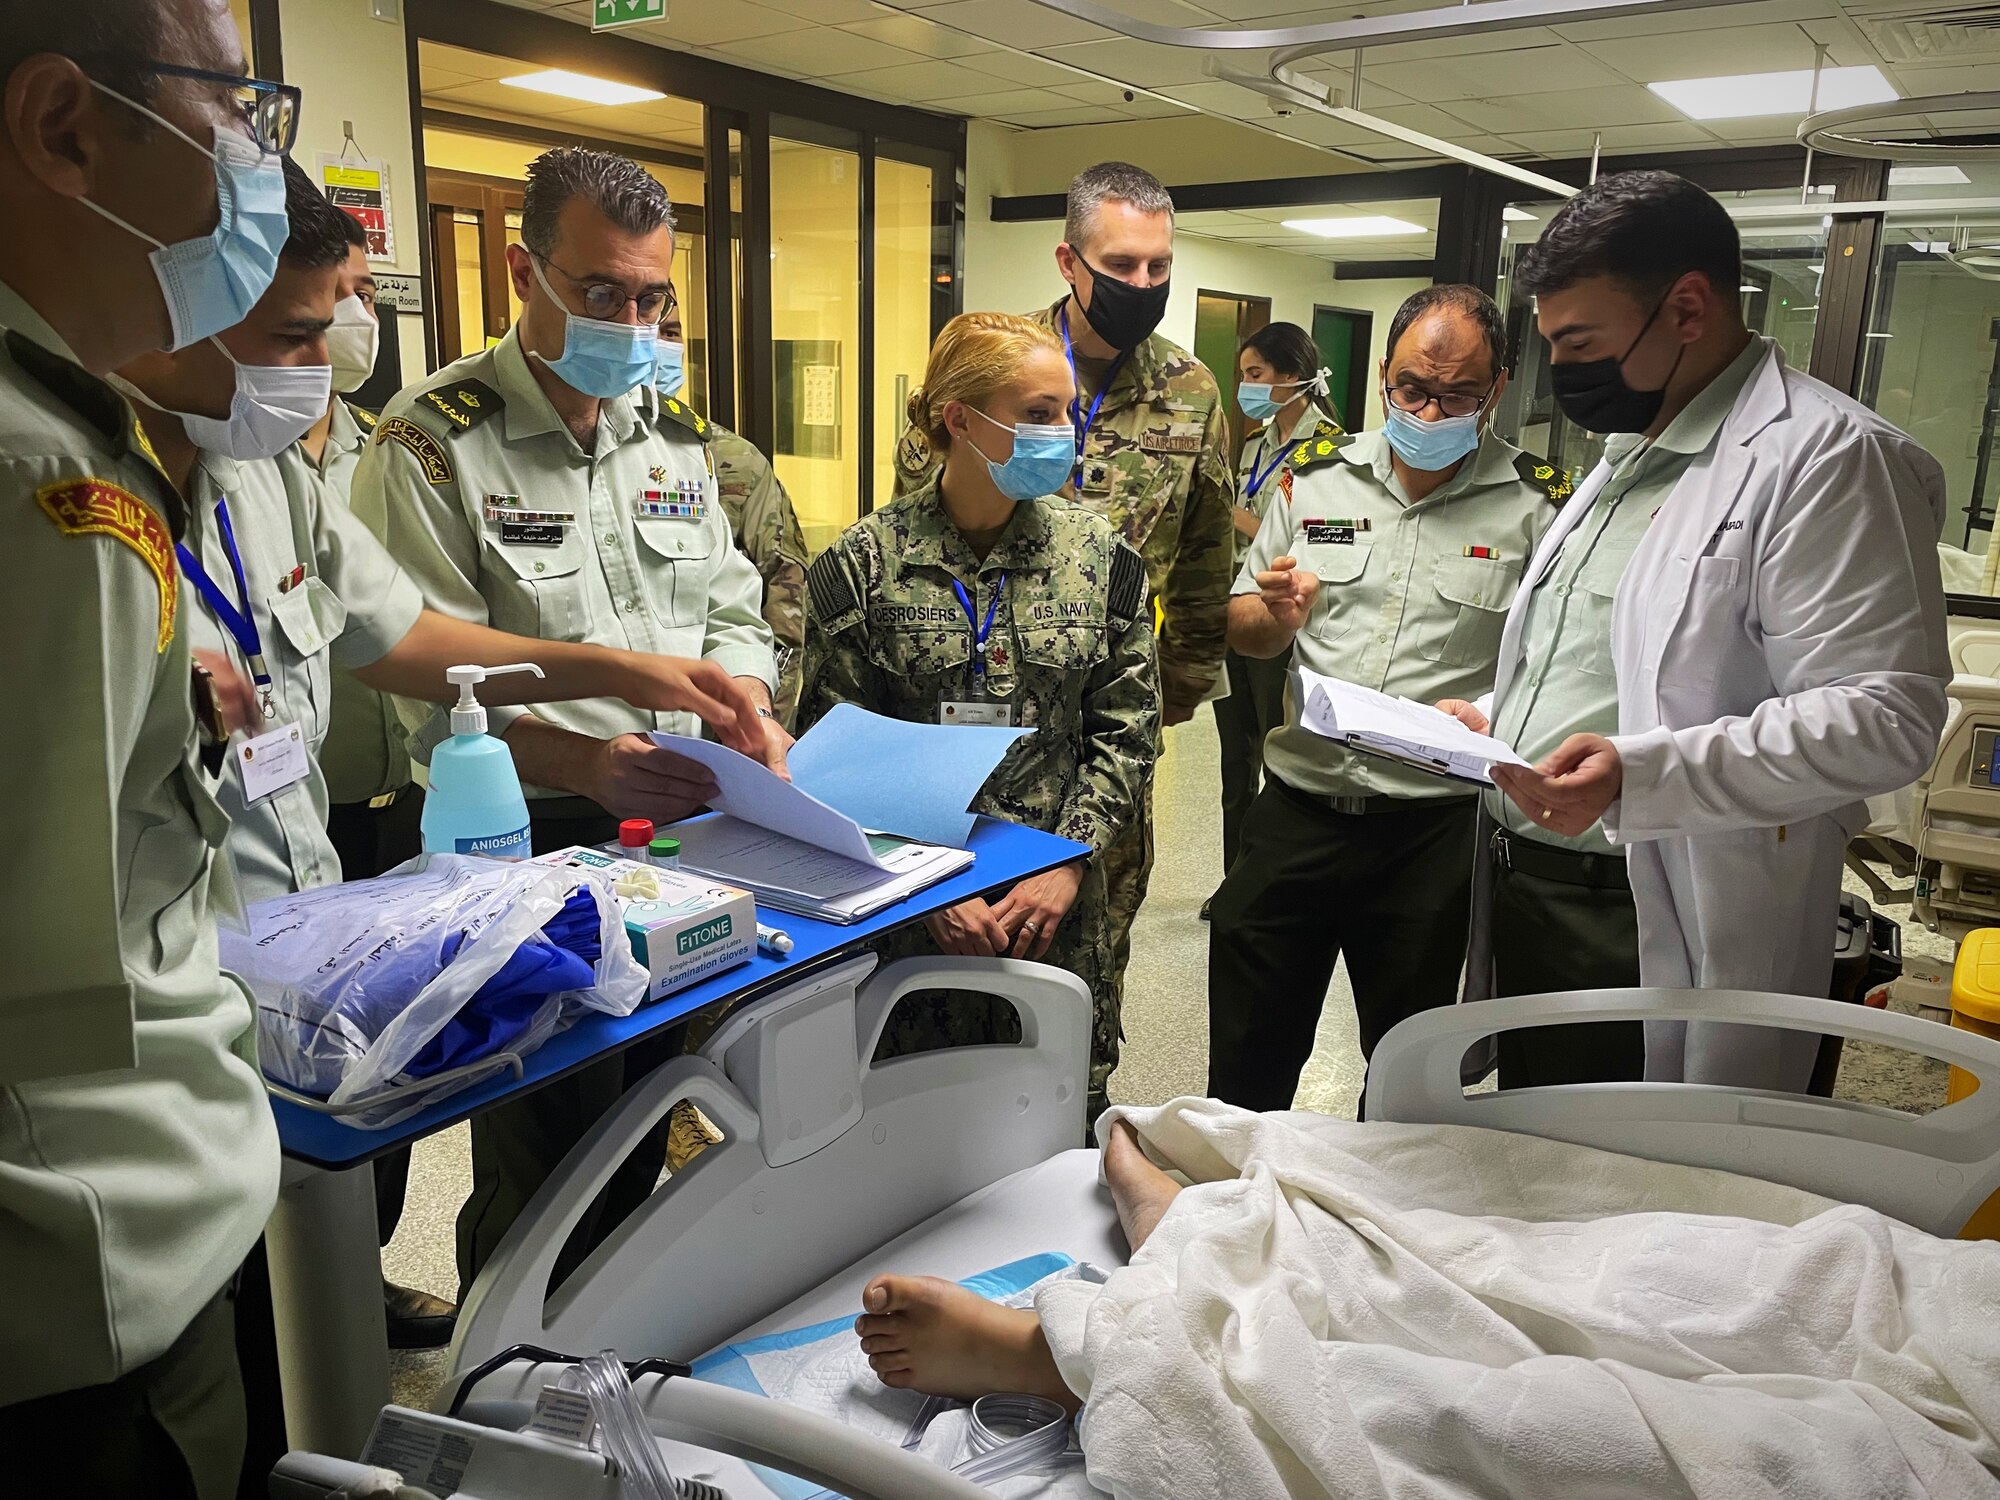 Several Jordanian Royal Medical Service doctors review an intensive care patient’s paperwork alongside Lt. Cmdr. Taylor DesRosiers, Walter Reed Medical Center critical care fellow, and Lt. Col. Erik DeSoucy, Brooke Army Medical Center trauma surgeon and critical care physician, inside the King Hussein Medical Center May 9, 2022 in Amman, Jordan.